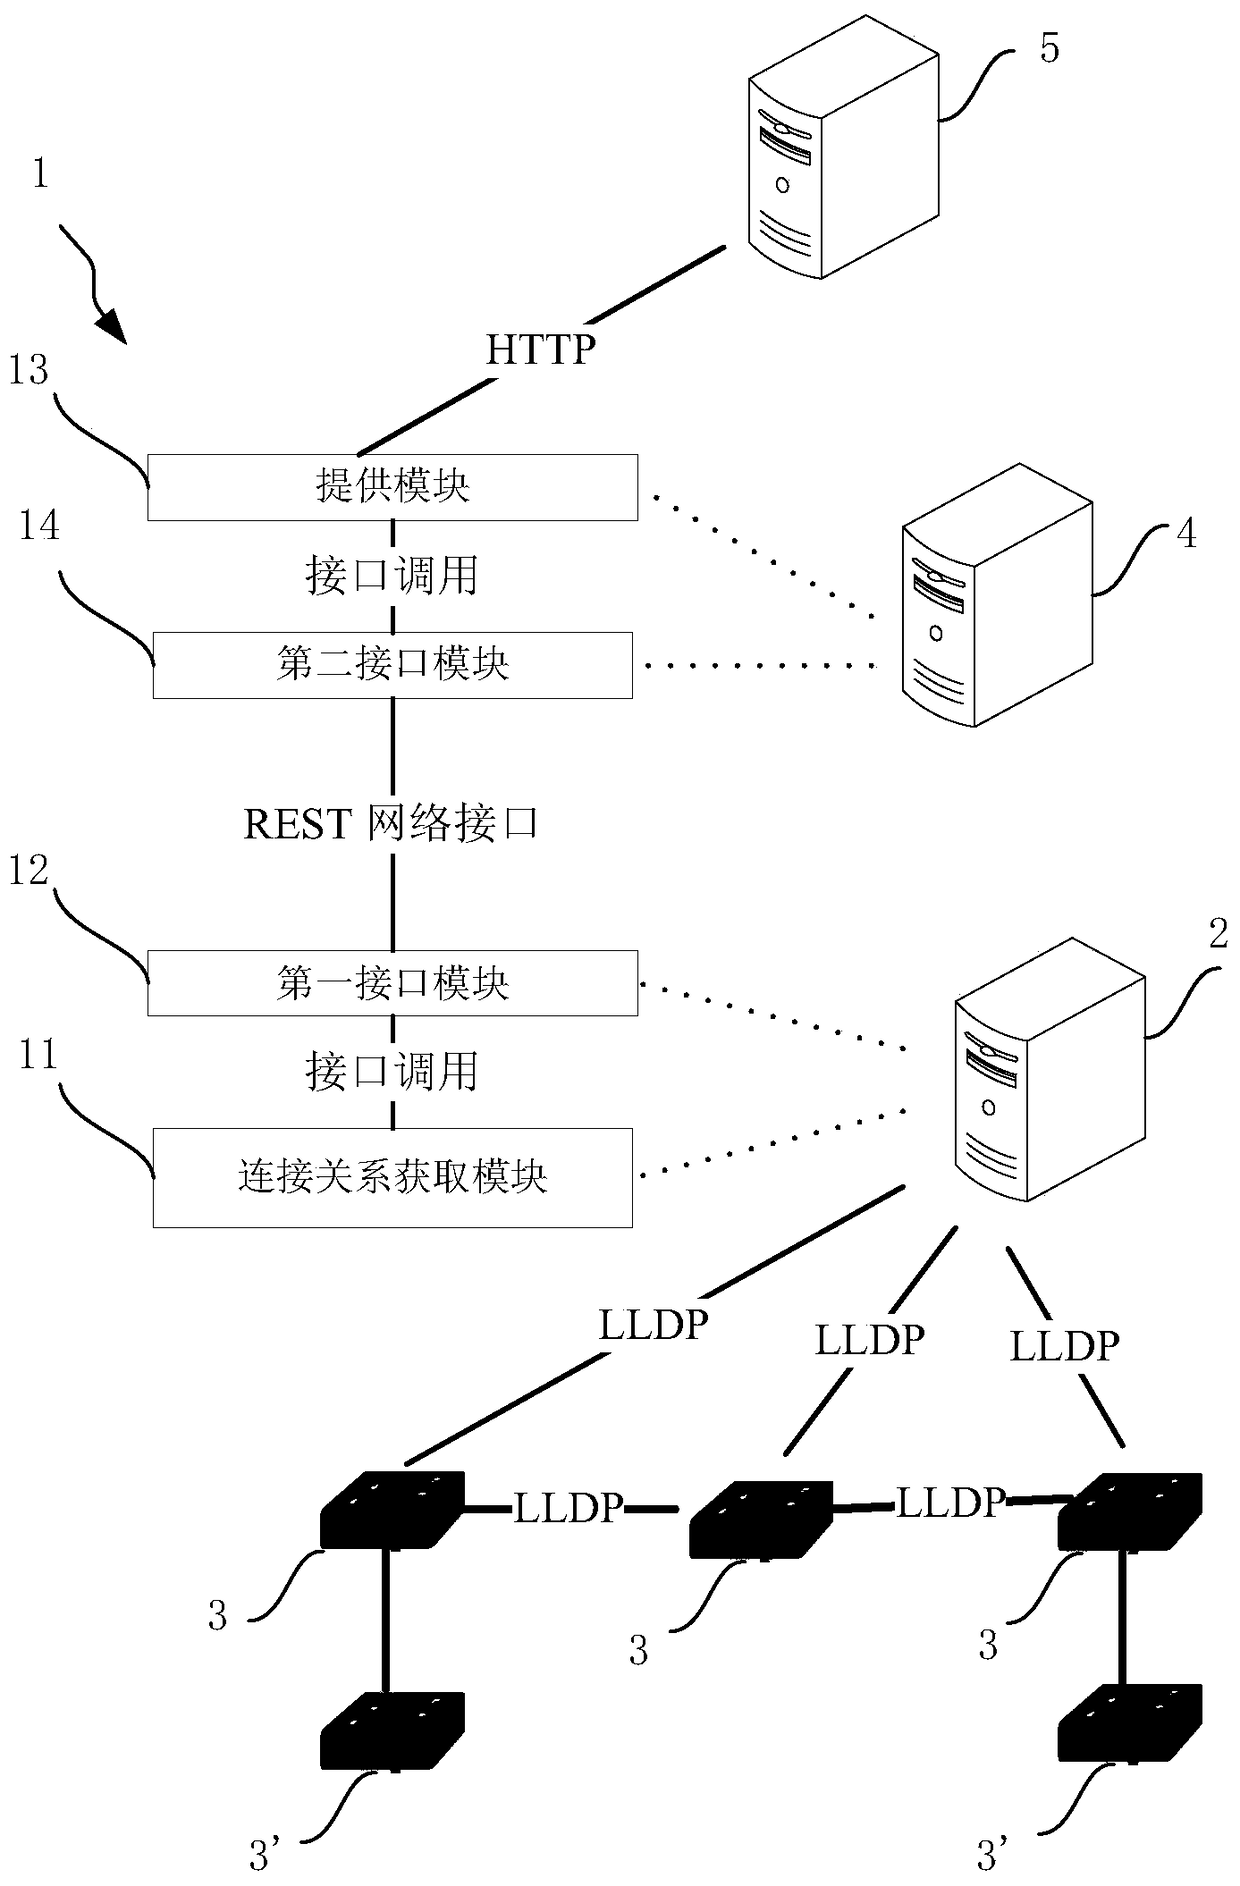 SDN network topology discovery and real-time presentation system and method